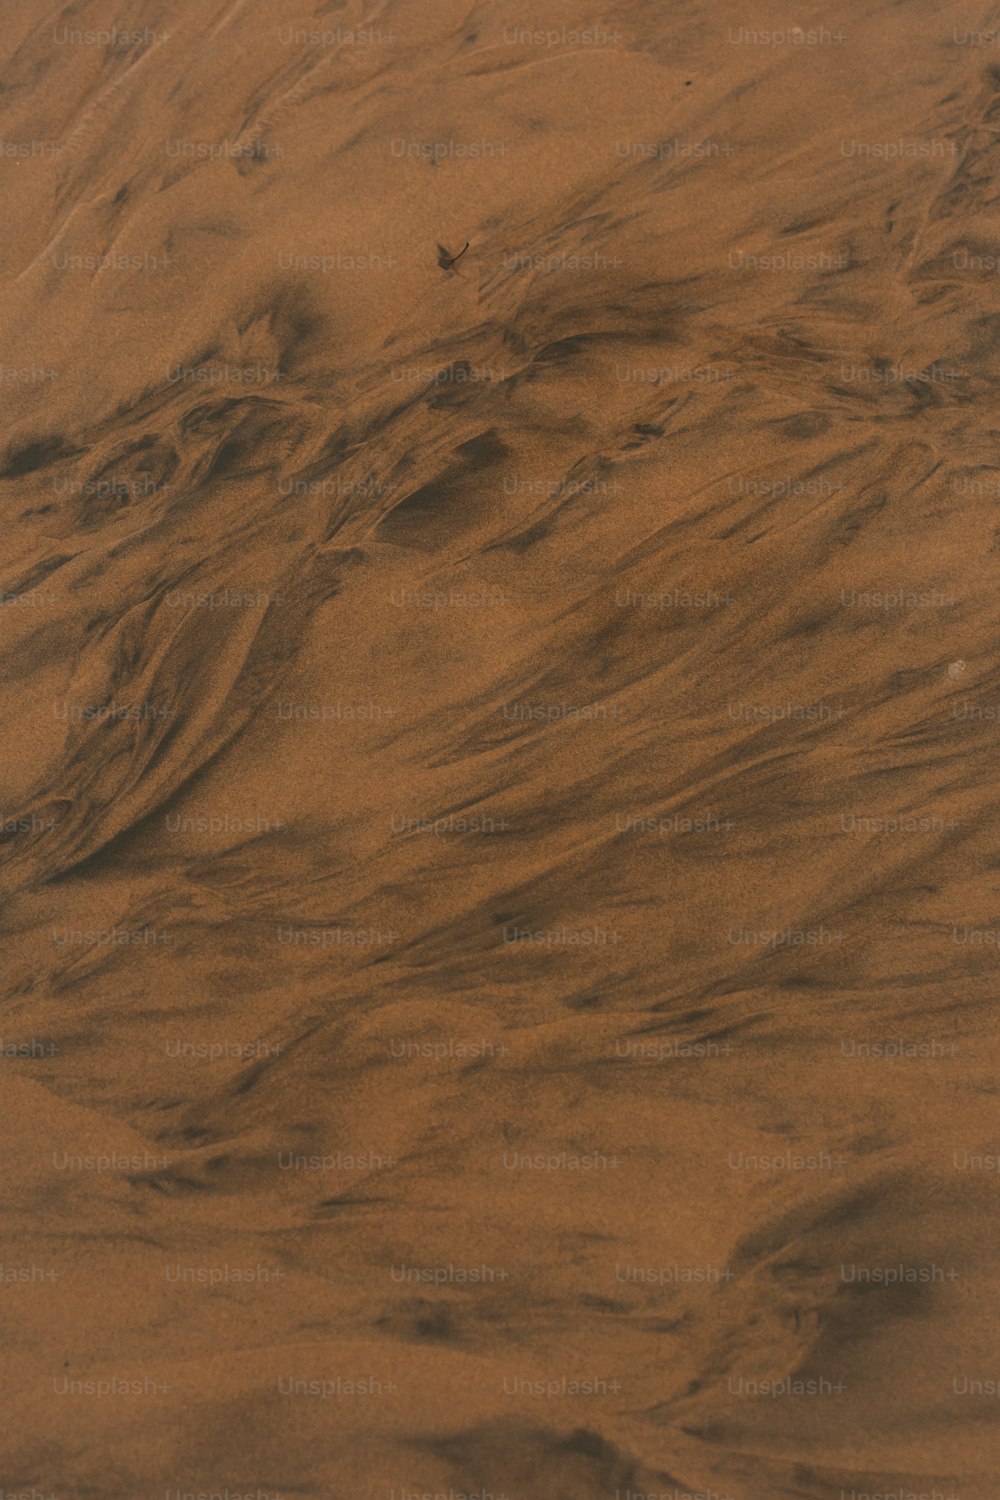 a bird flying over a sandy beach covered in sand